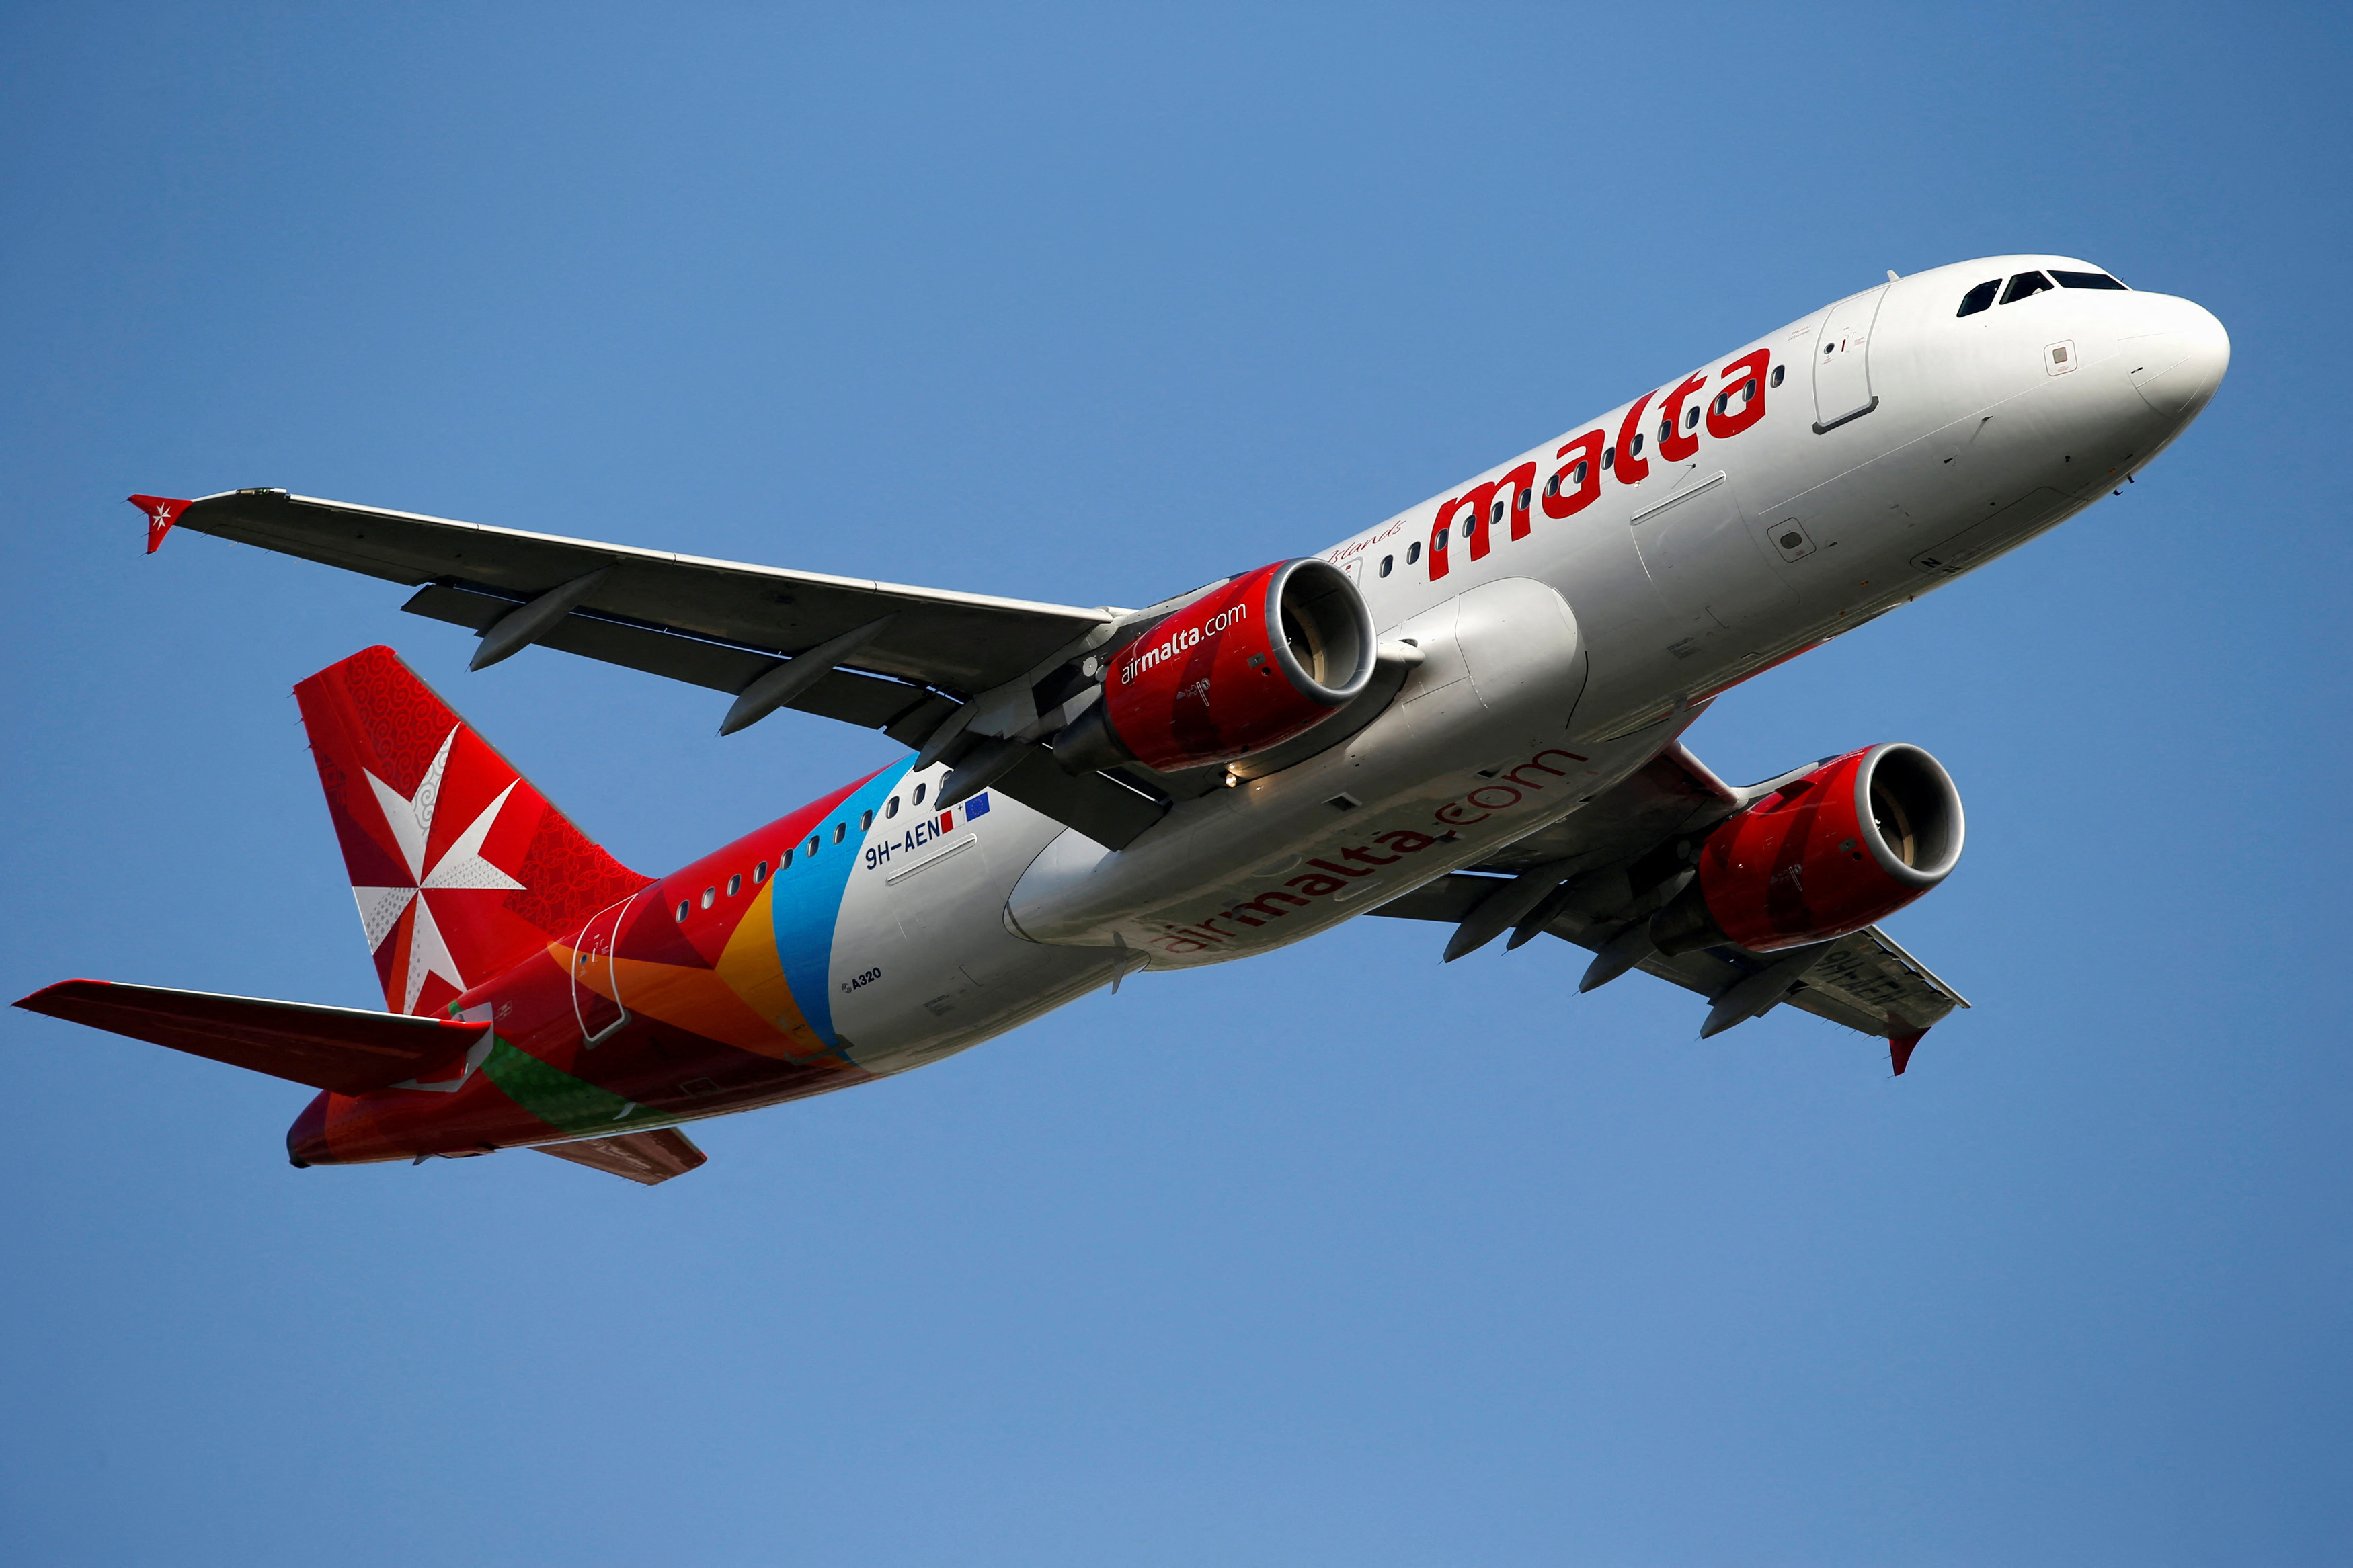 Air Malta Airbus A320 airliner, sporting the Maltese national airline's new livery, does a fly past during the Malta Airshow at Malta International Airport outside Valletta